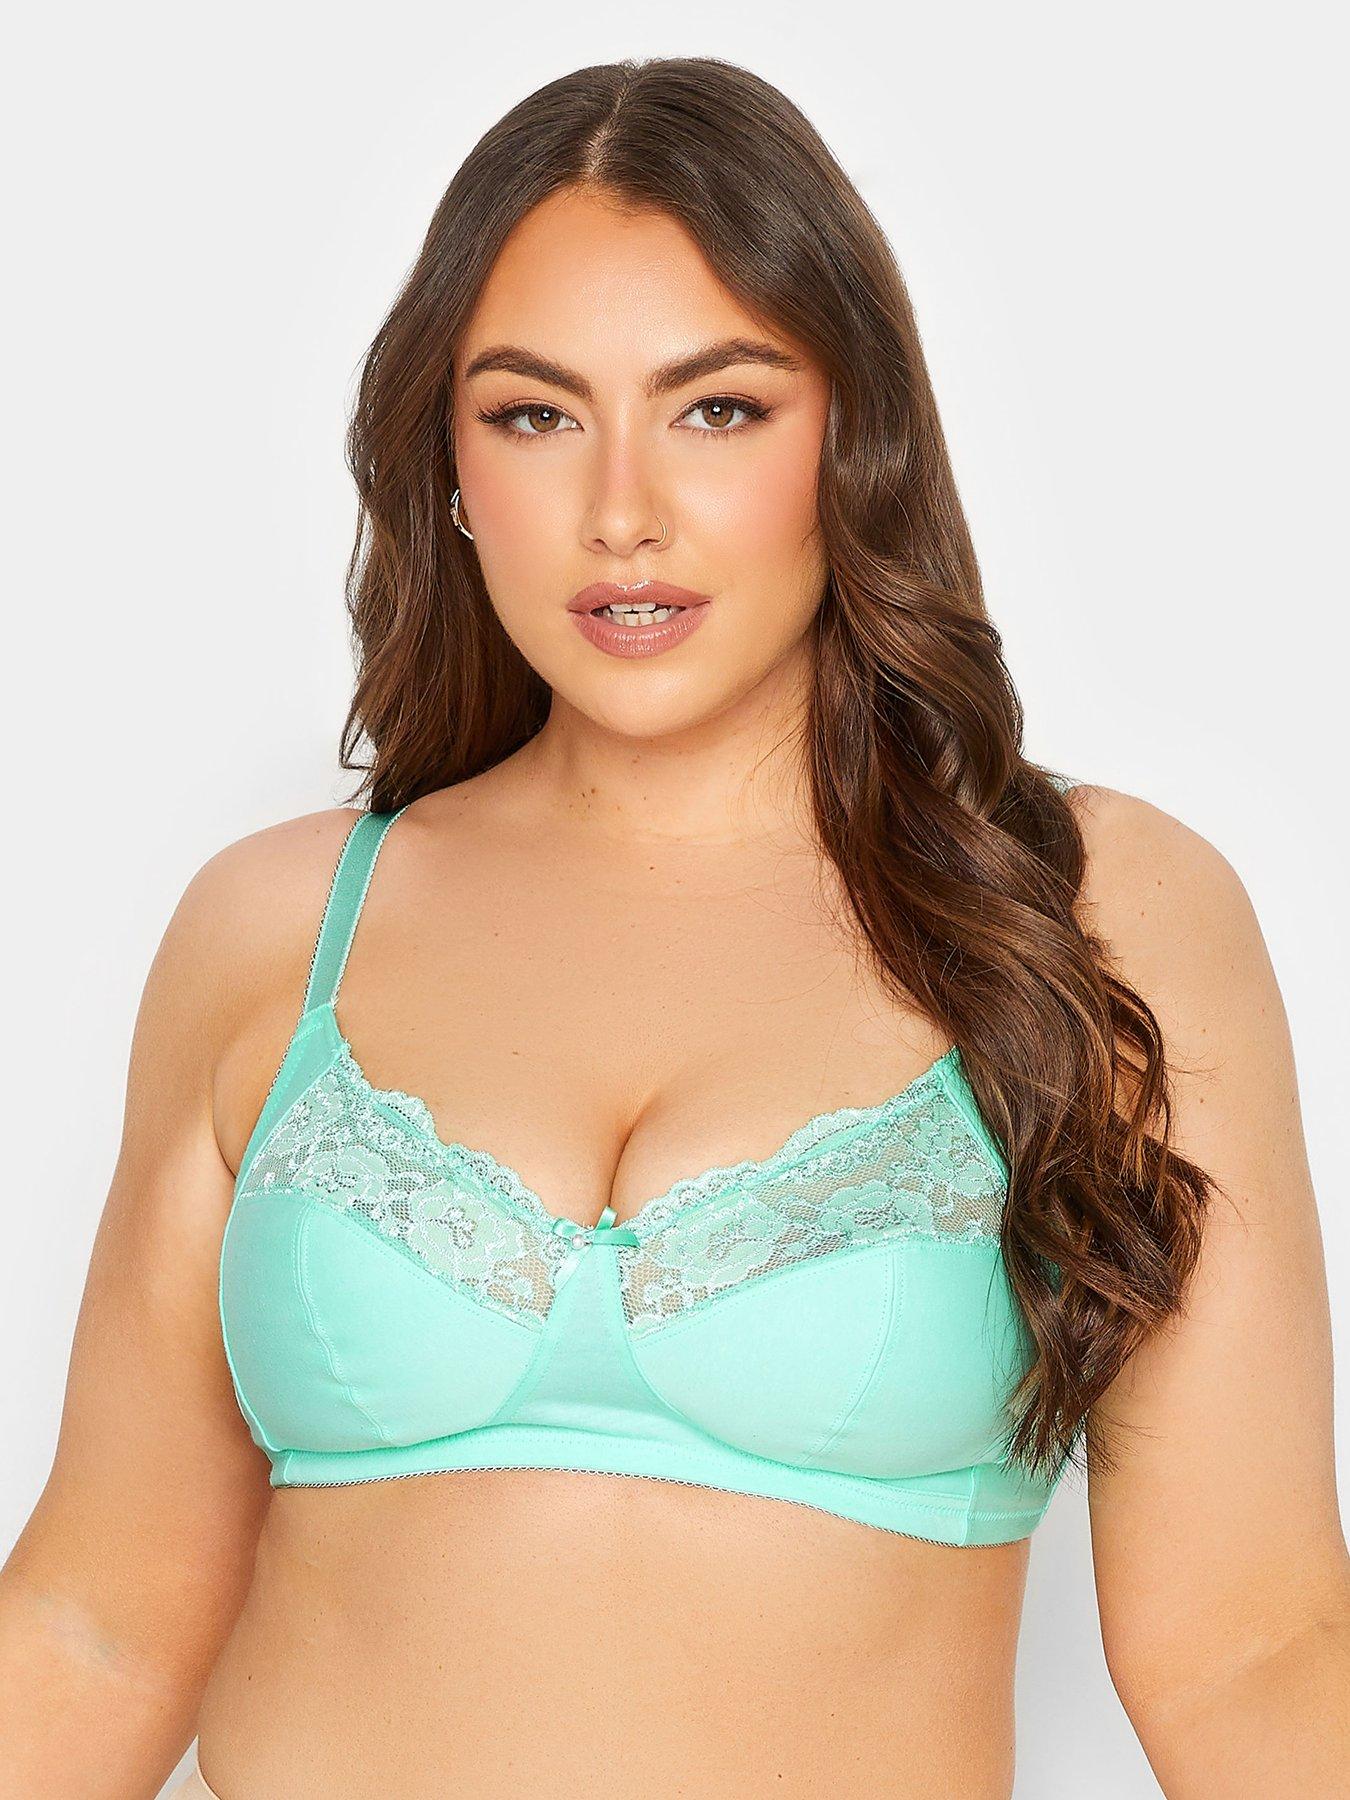 Women's Cotton Full Coverage Wirefree Non-padded Lace Plus Size Bra 50DD